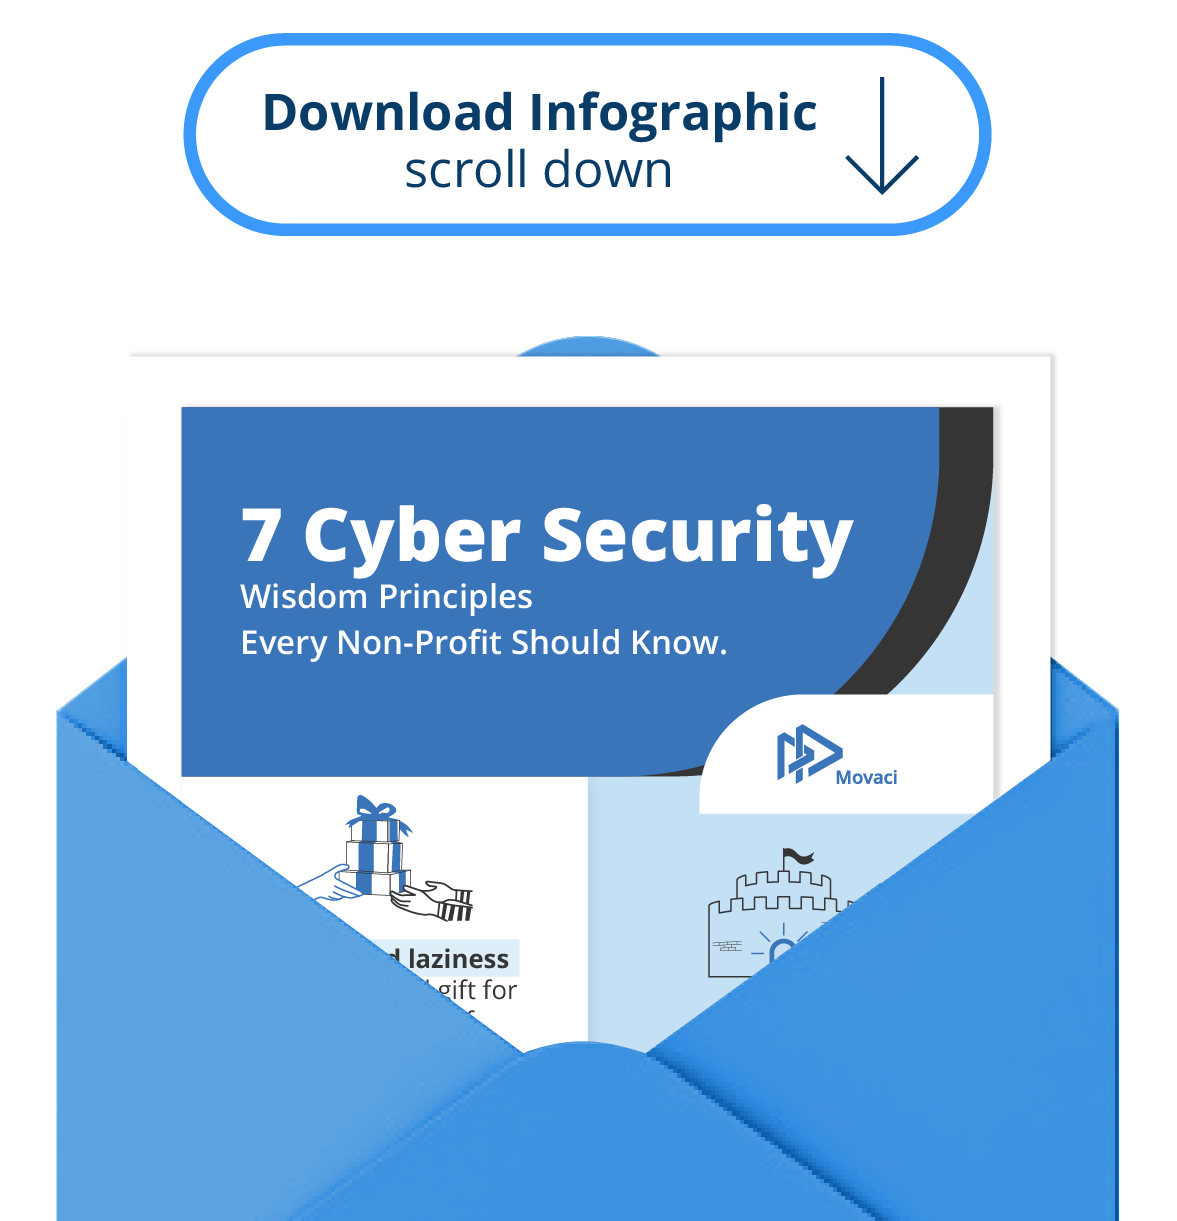 7 Cyber Security